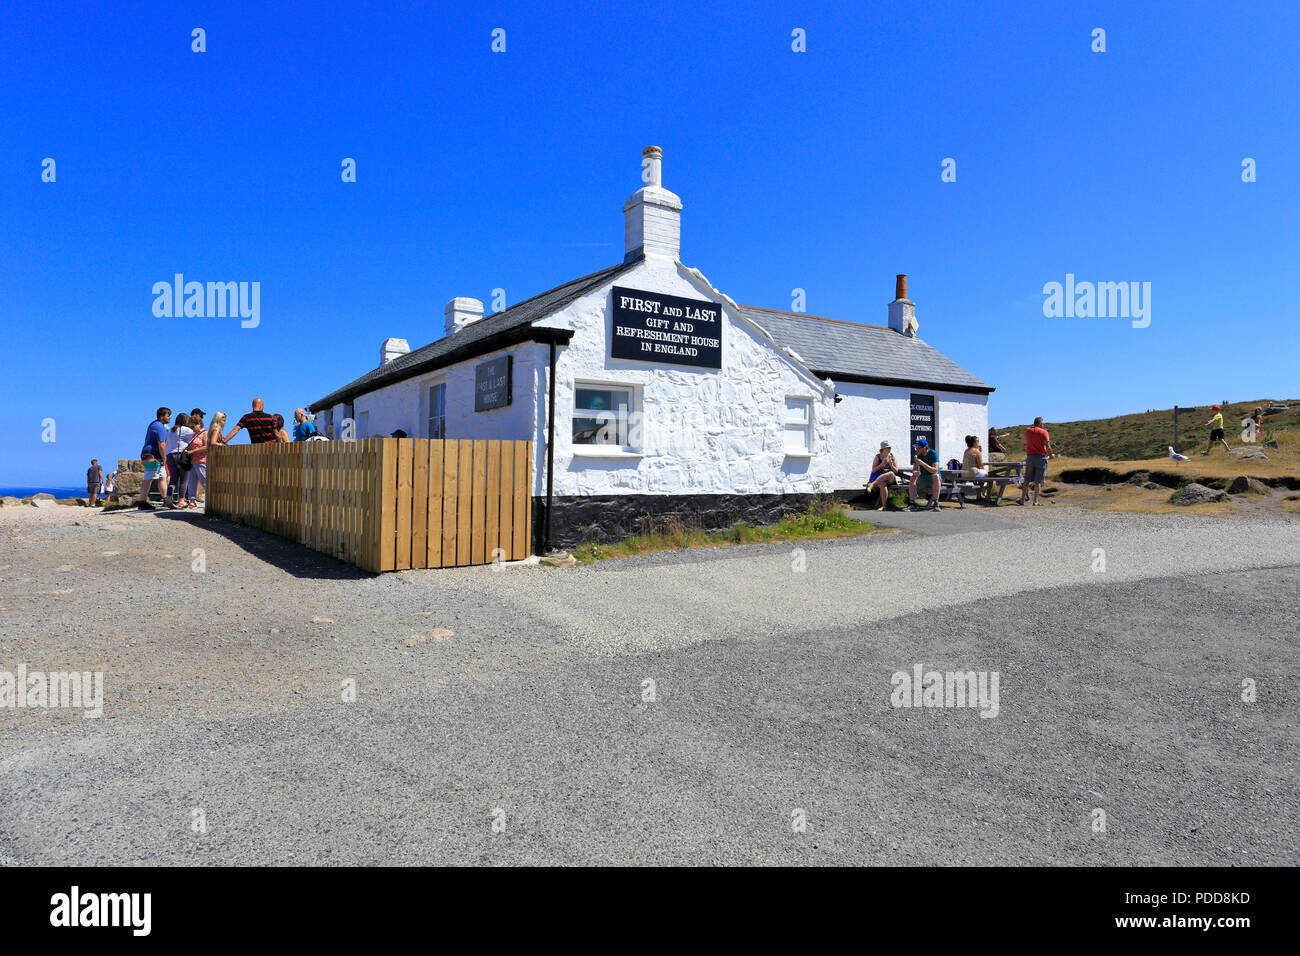 First and Last Gift and Refreshment House in England on the South West Coast Path, Land's End, Sennen, Cornwall, England, UK. Stock Photo